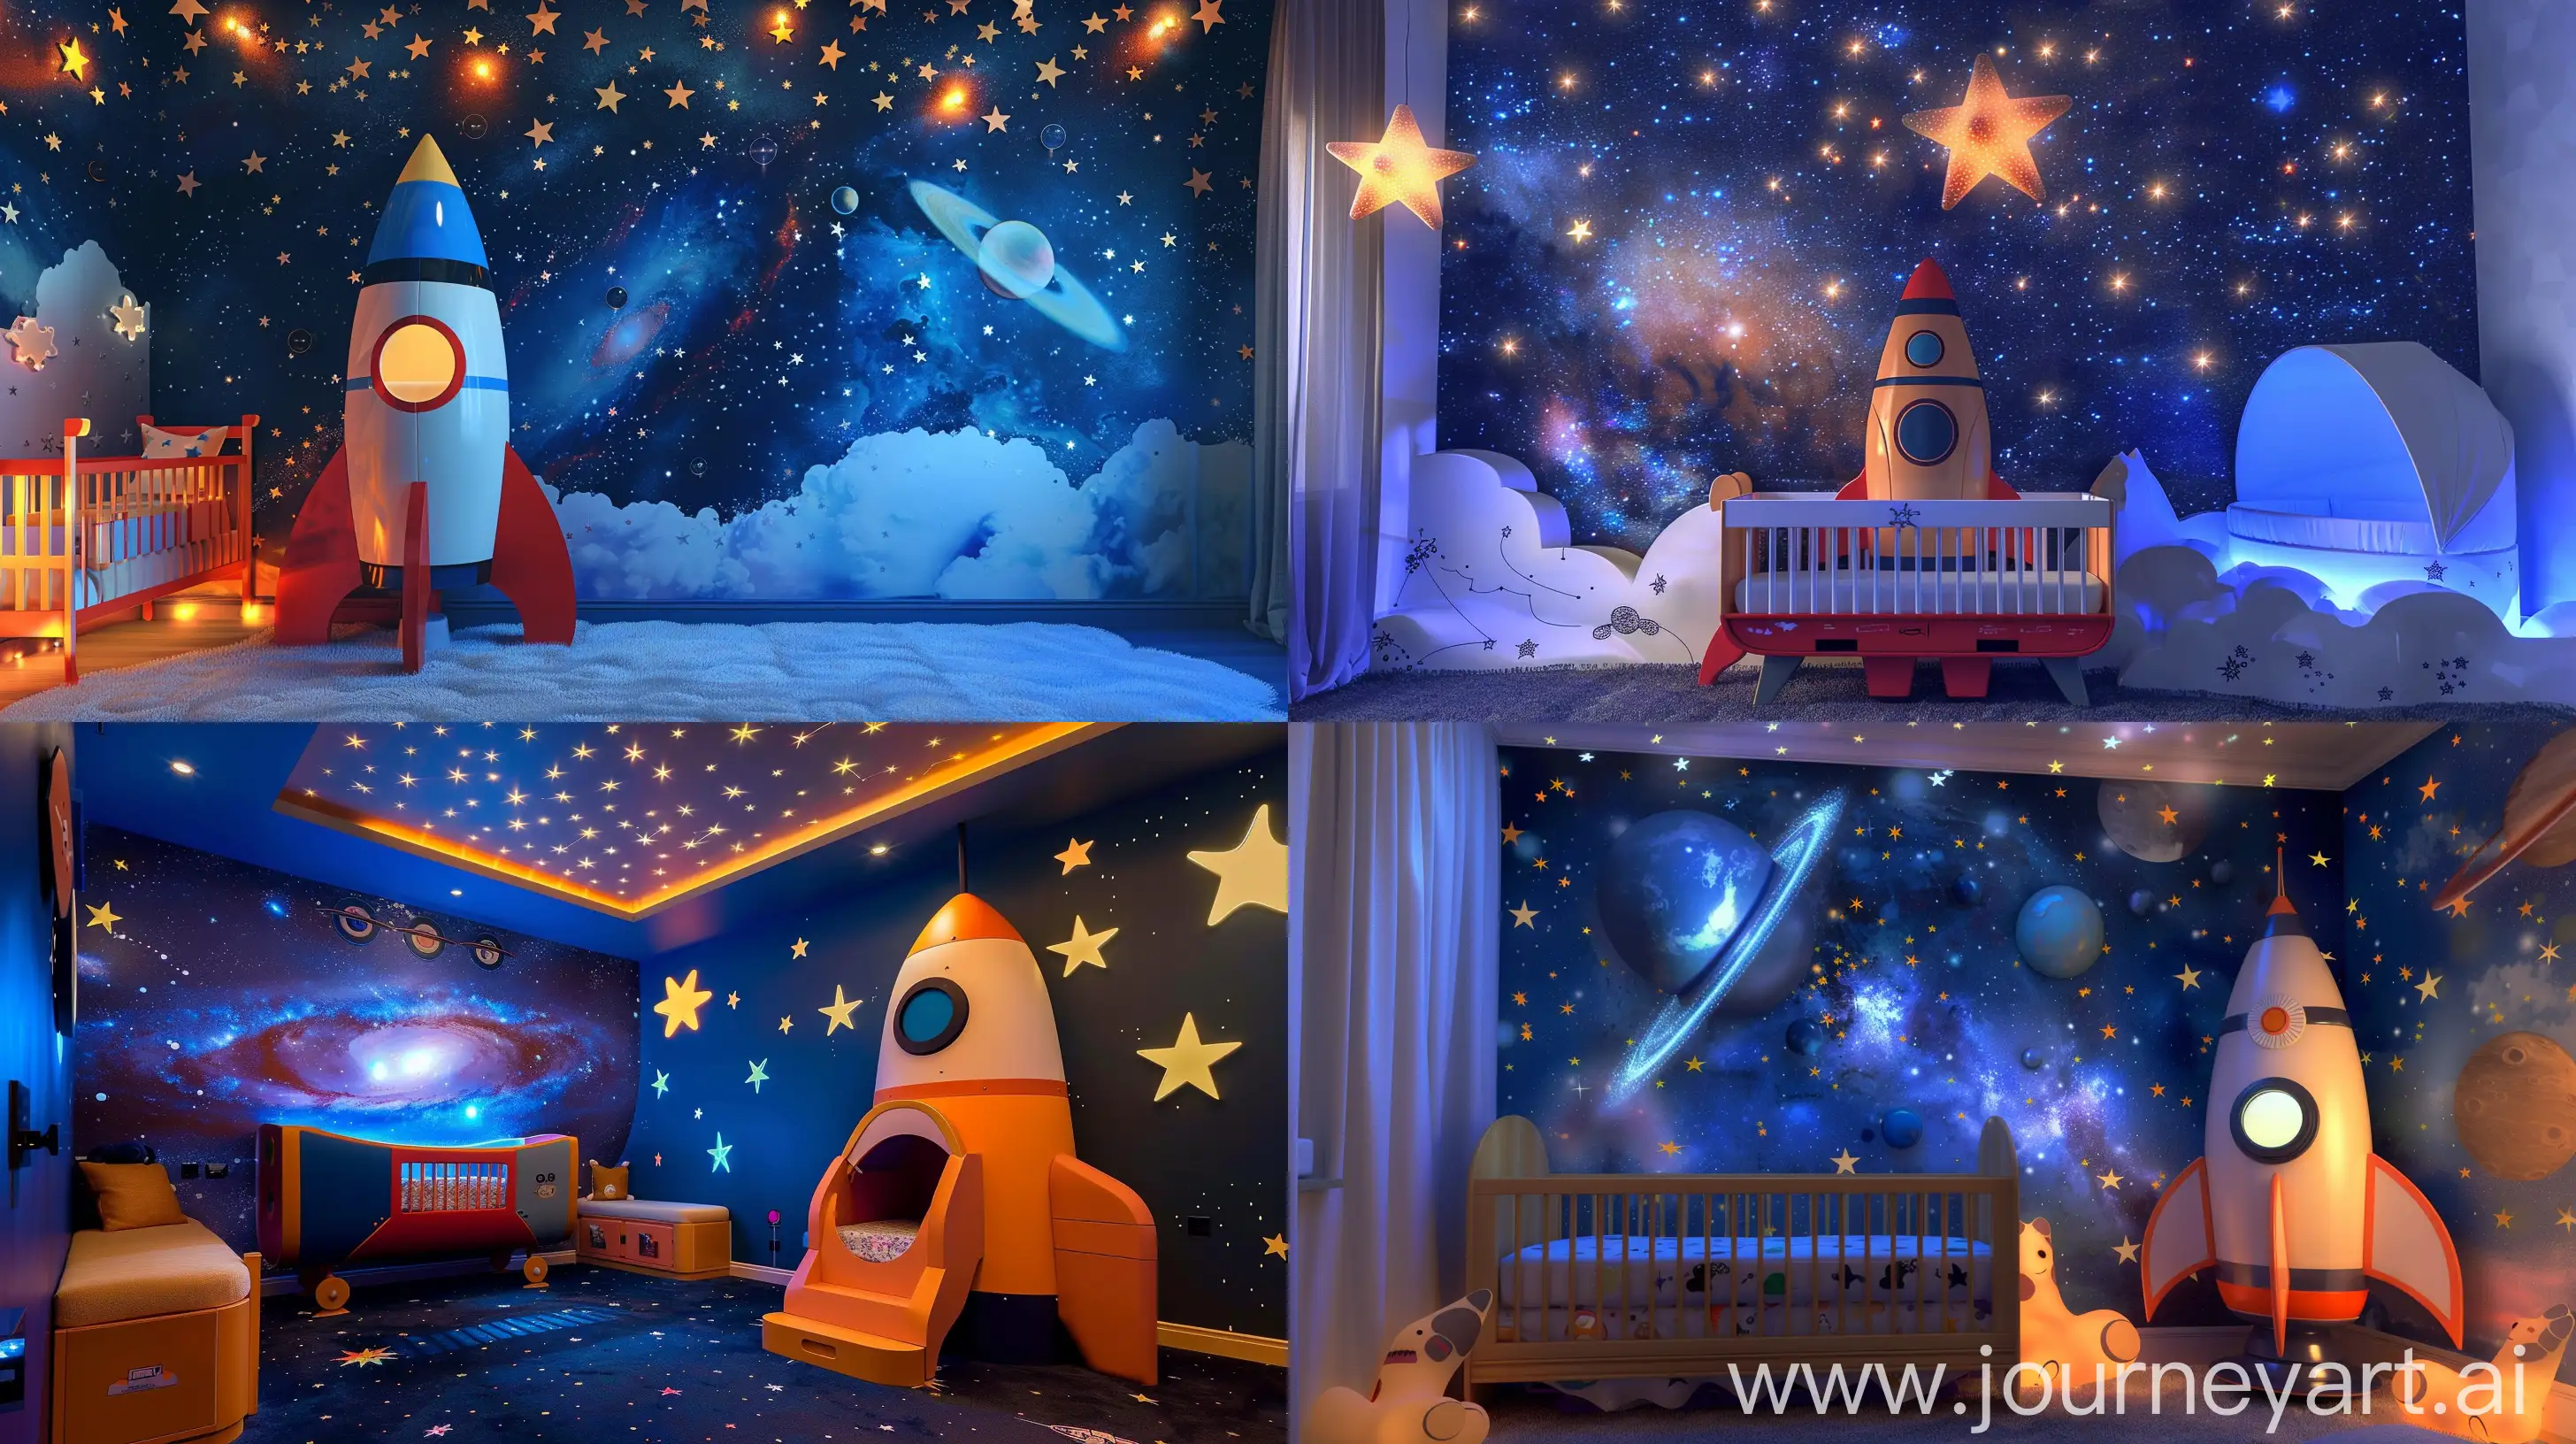 Space Adventure: Nursery Room with Rocket Ship Crib, Galaxy Wall Mural, and Glowing Star Ceiling Lights. --ar 16:9